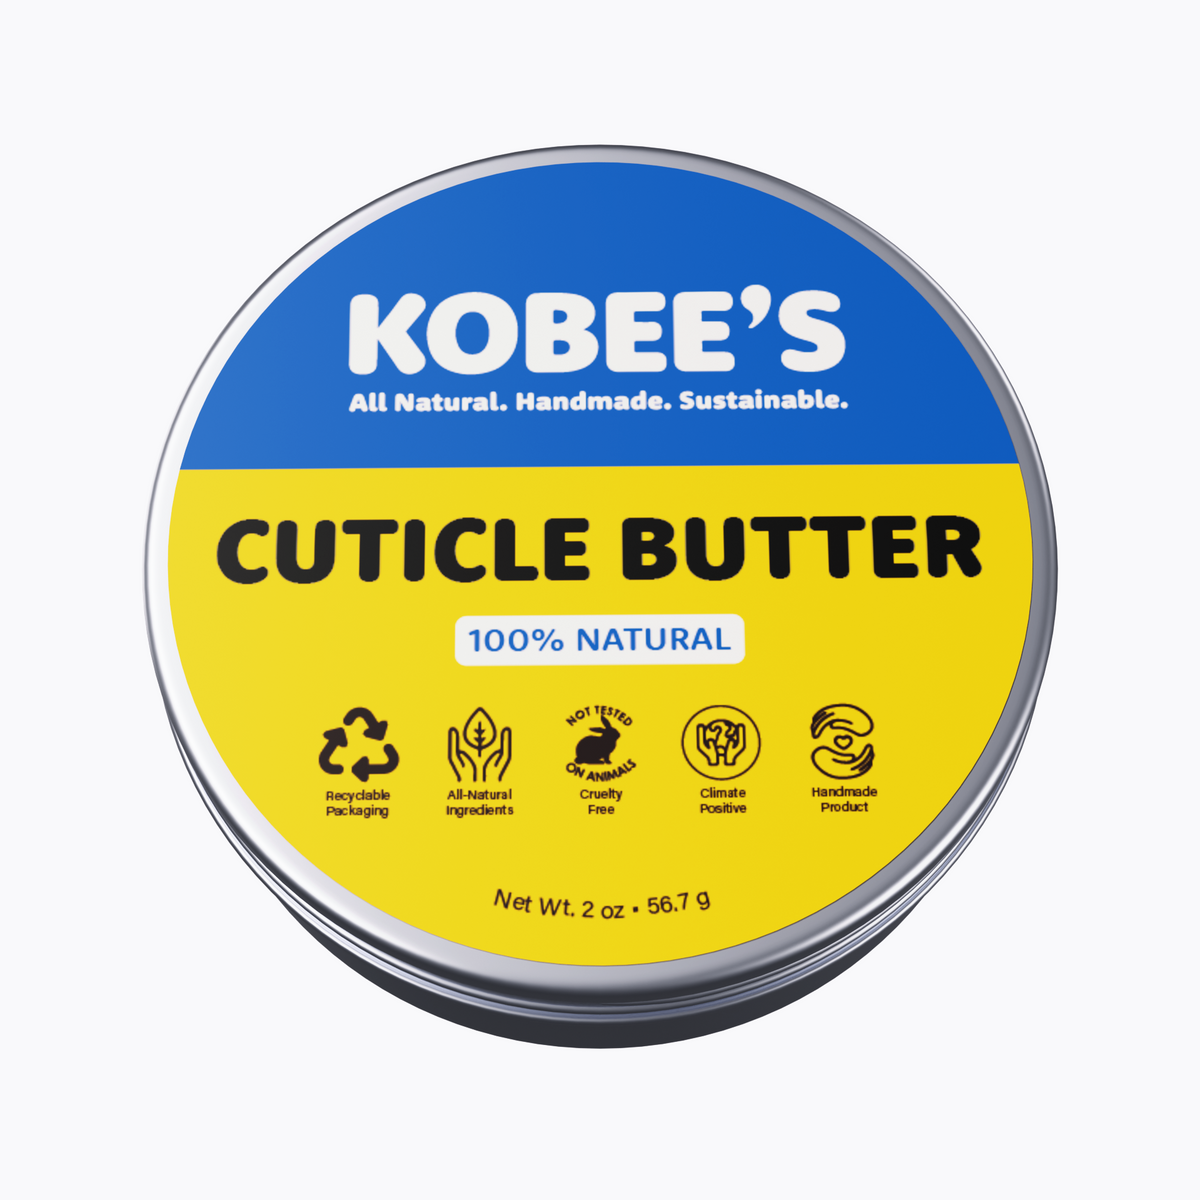 Cuticle Butter